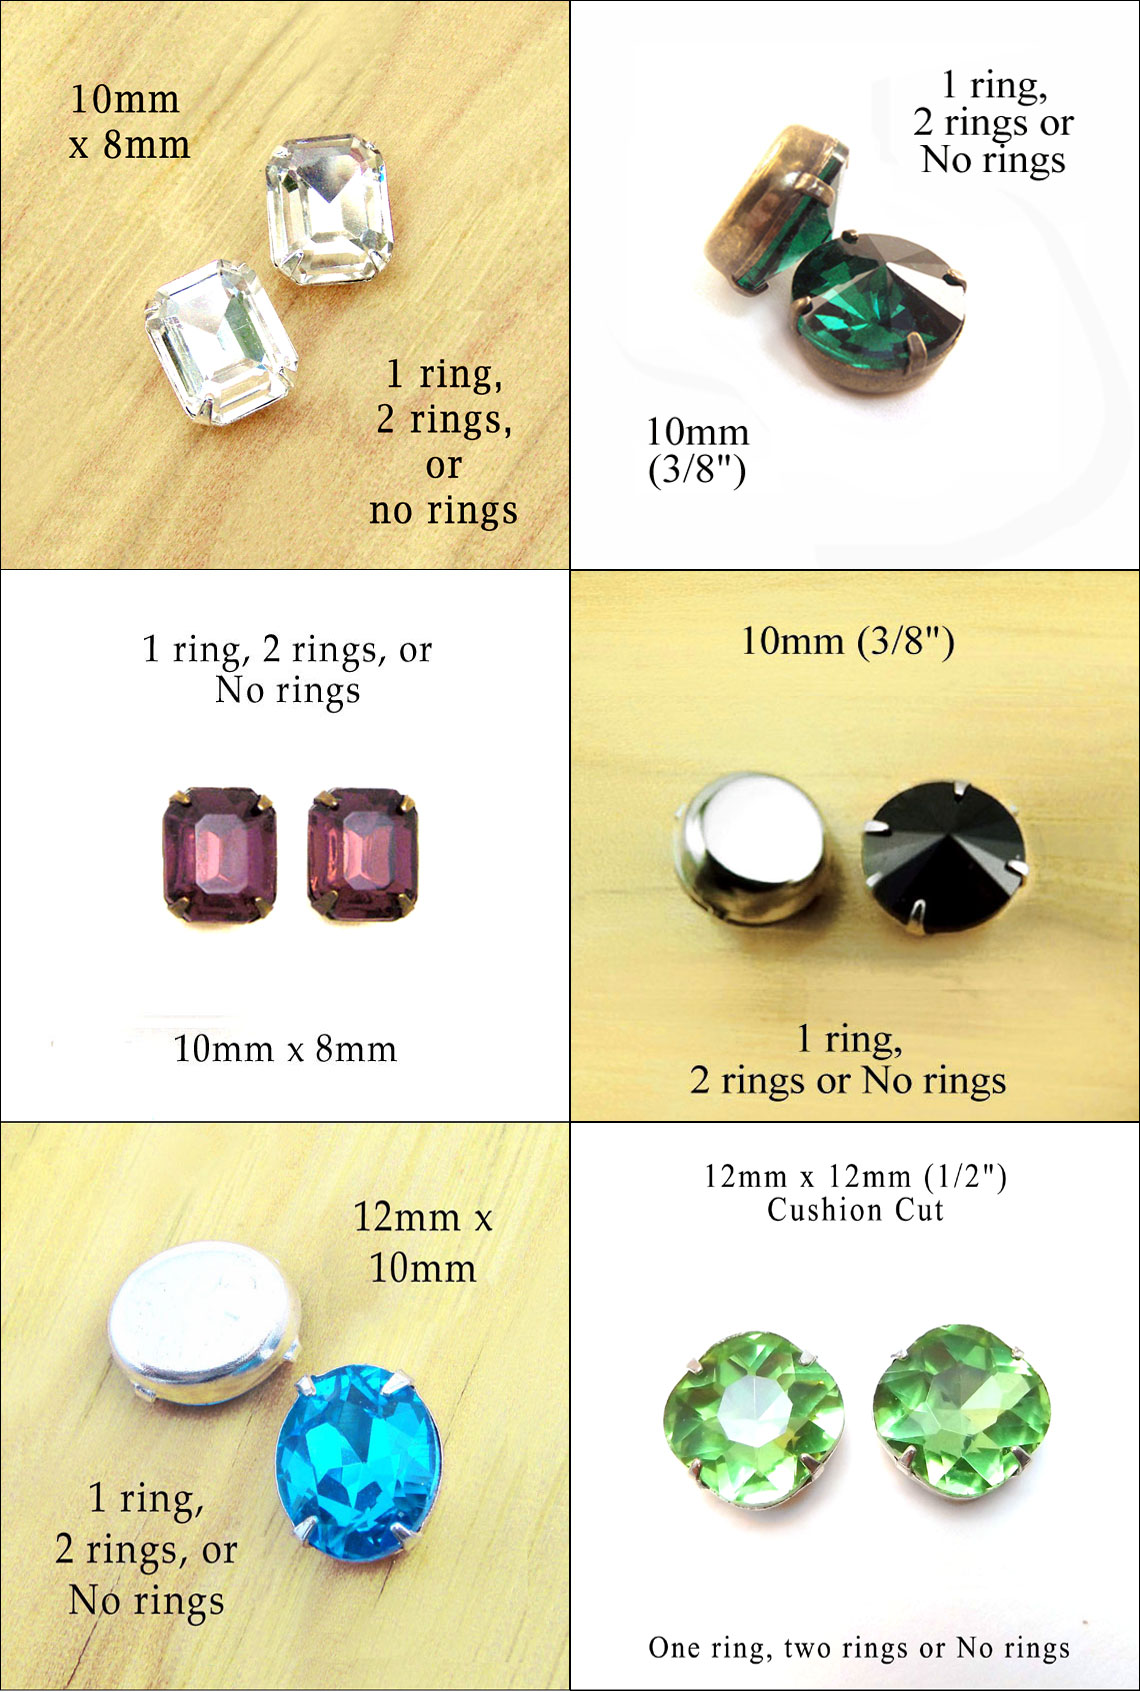 glass jewels in no ring settings...great for button and stud earrings